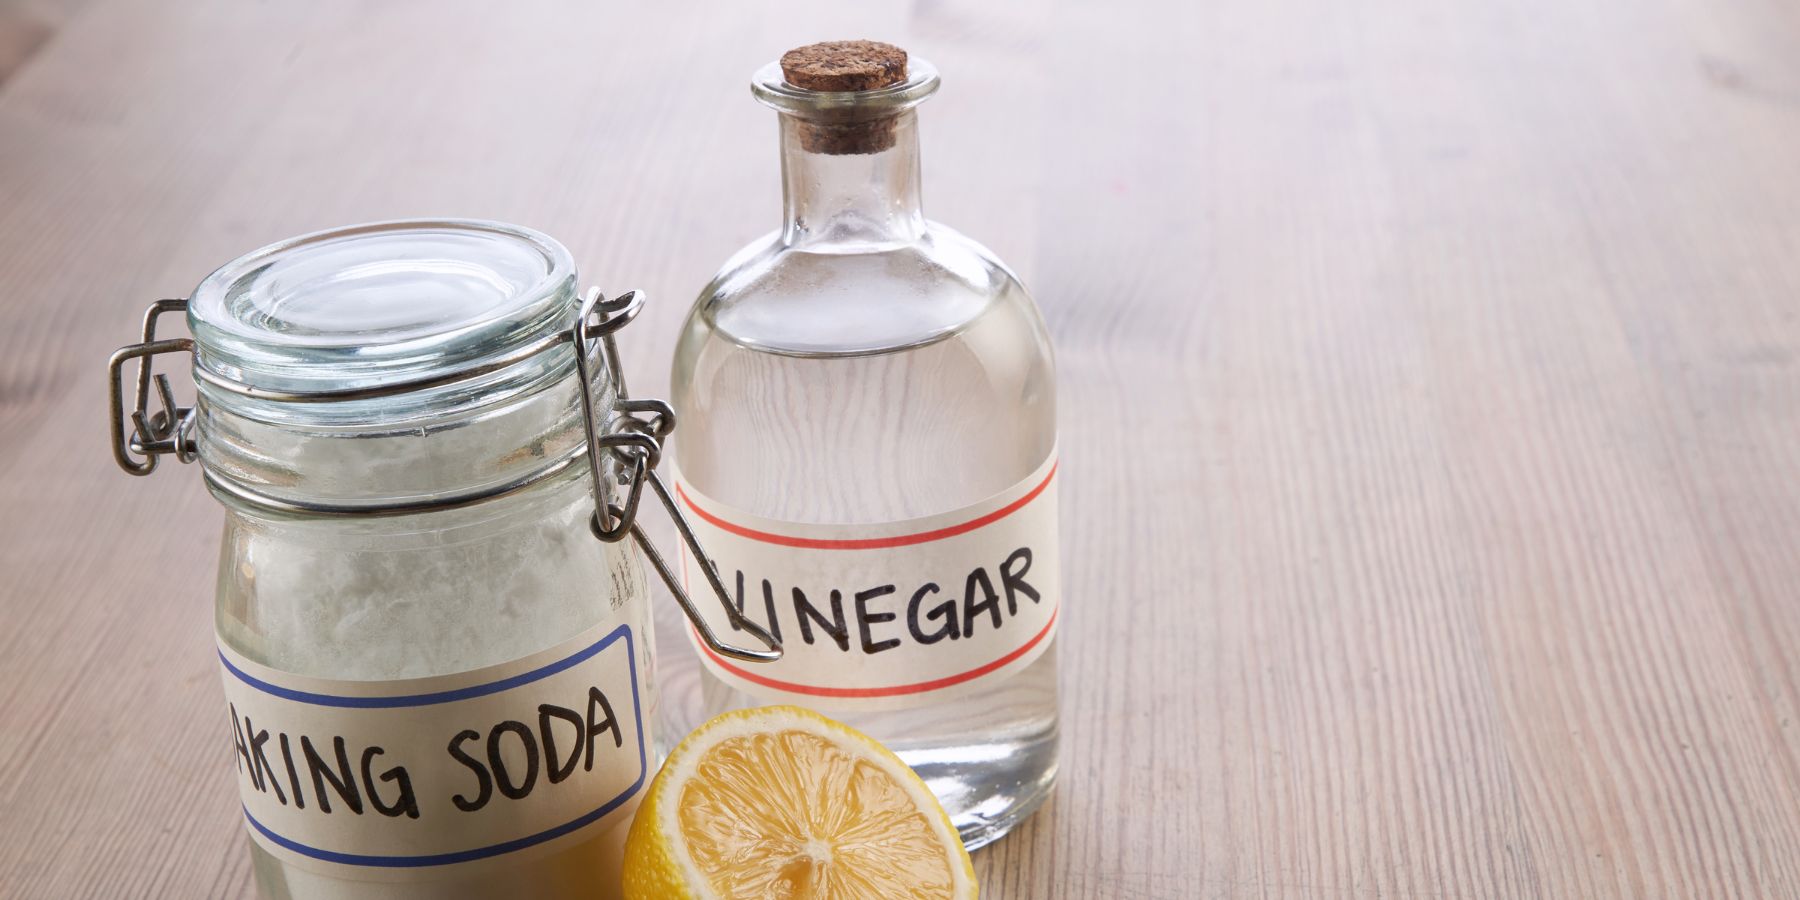 Can Vinegar and Baking Soda Safely Disinfect Your Water Bottle?